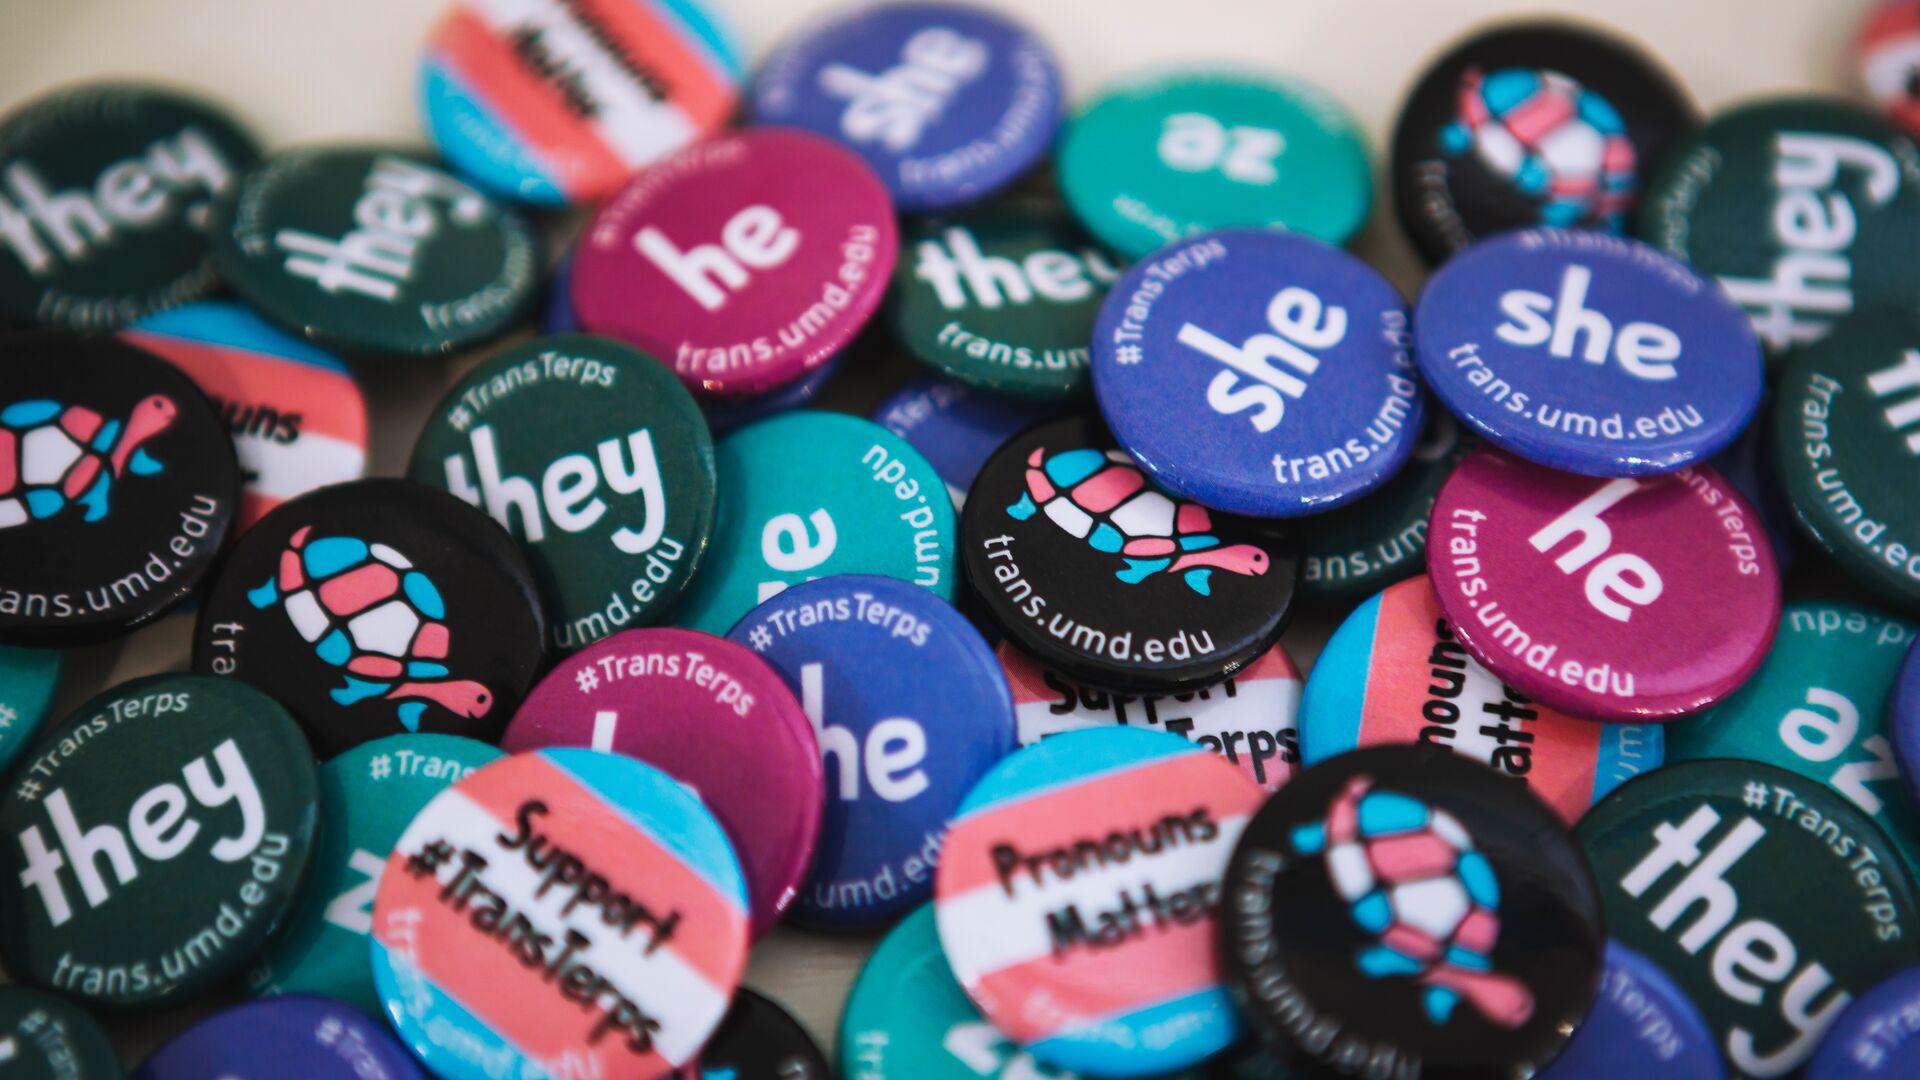 A pile of buttons in support of inclusive pronoun usage distributed by the Lesbian, Gay, Bisexual, and Transgender Equity Center.